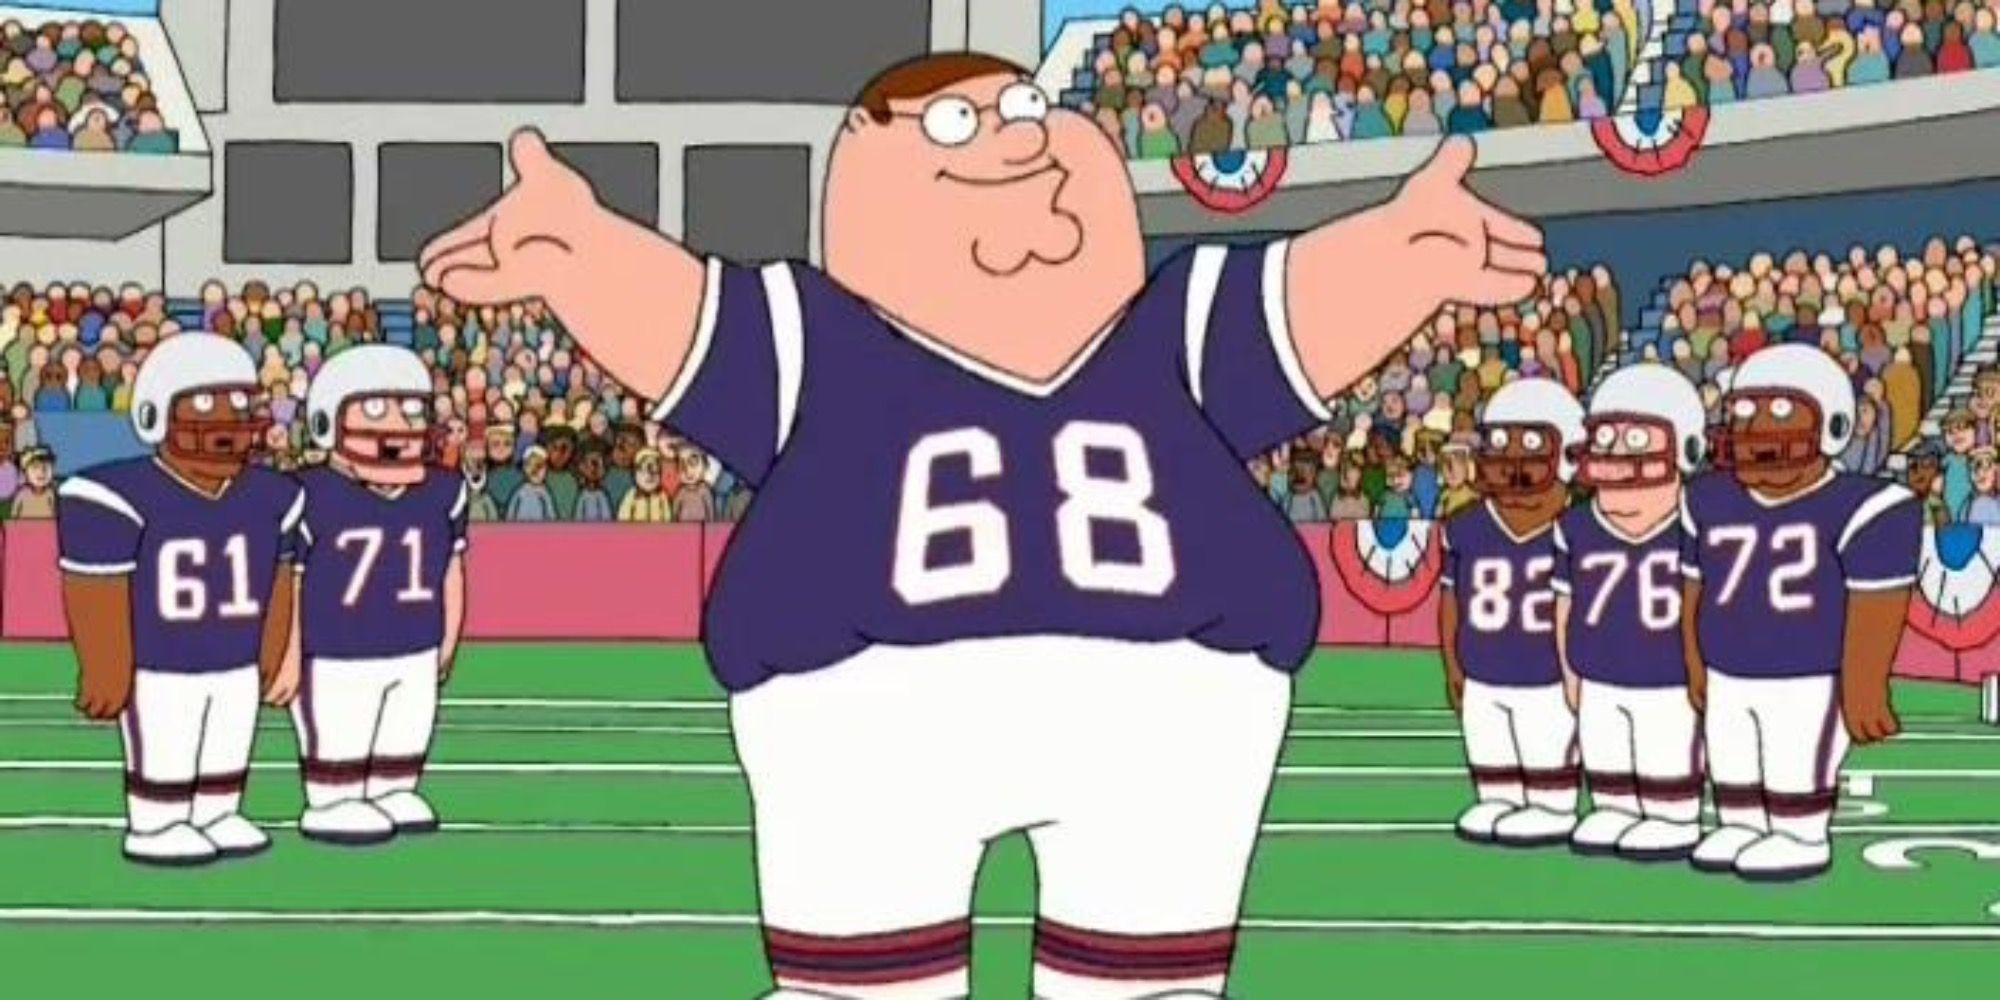 Peter singing to an audience at a football game